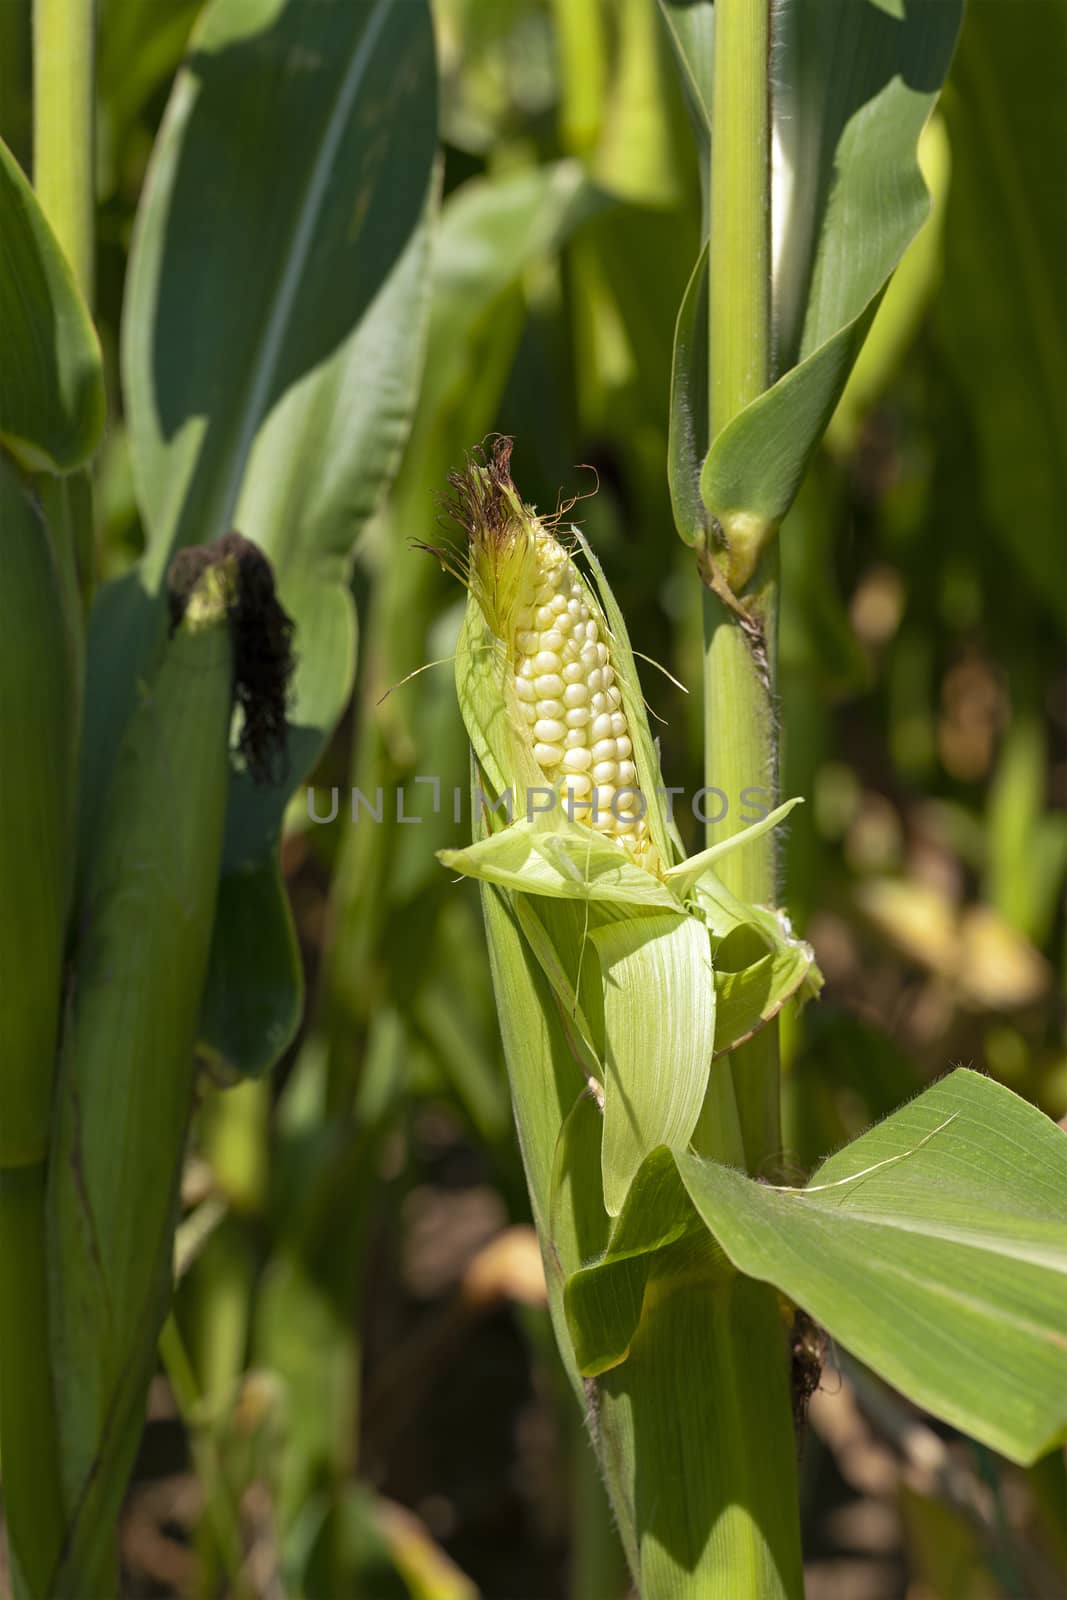  photographed by a close up ears of green corn.